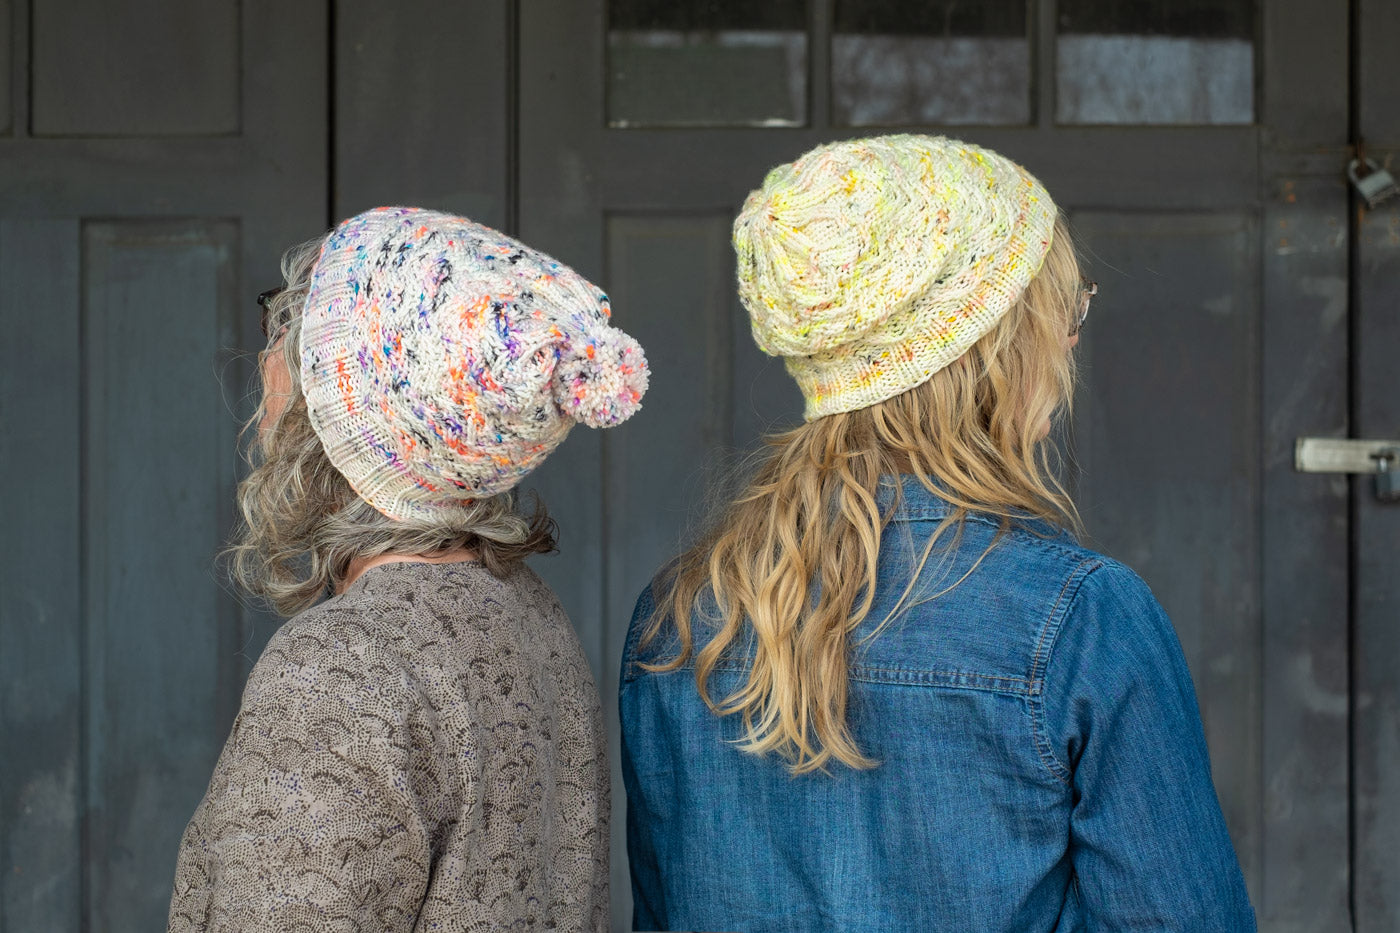 Jaime and Amber standing back to back, both wear handknits hats that are white with neon speckles, amber's is yellow speckles and Jaime's is coral, purple and blue speckles. The hats have a textured stitch.